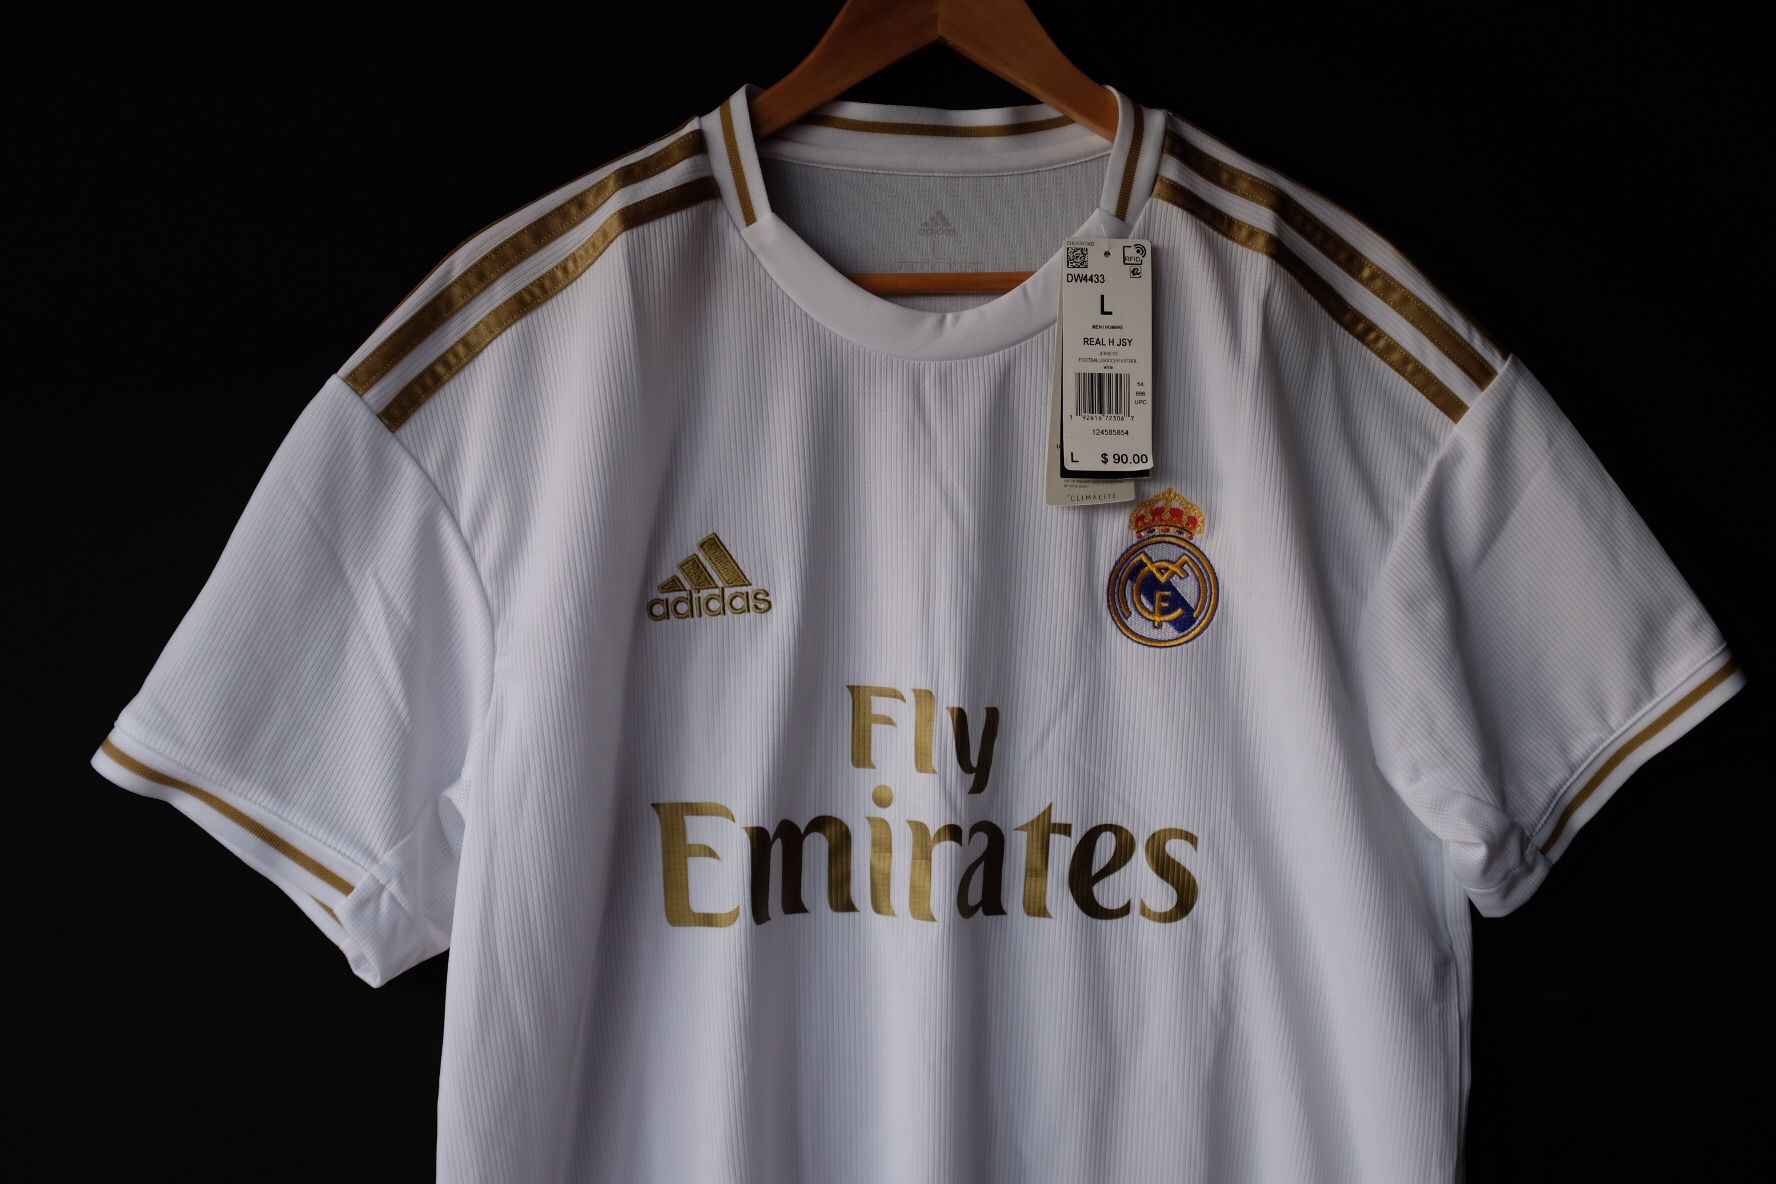 Real Madrid C.F. Home Jersey (Large)